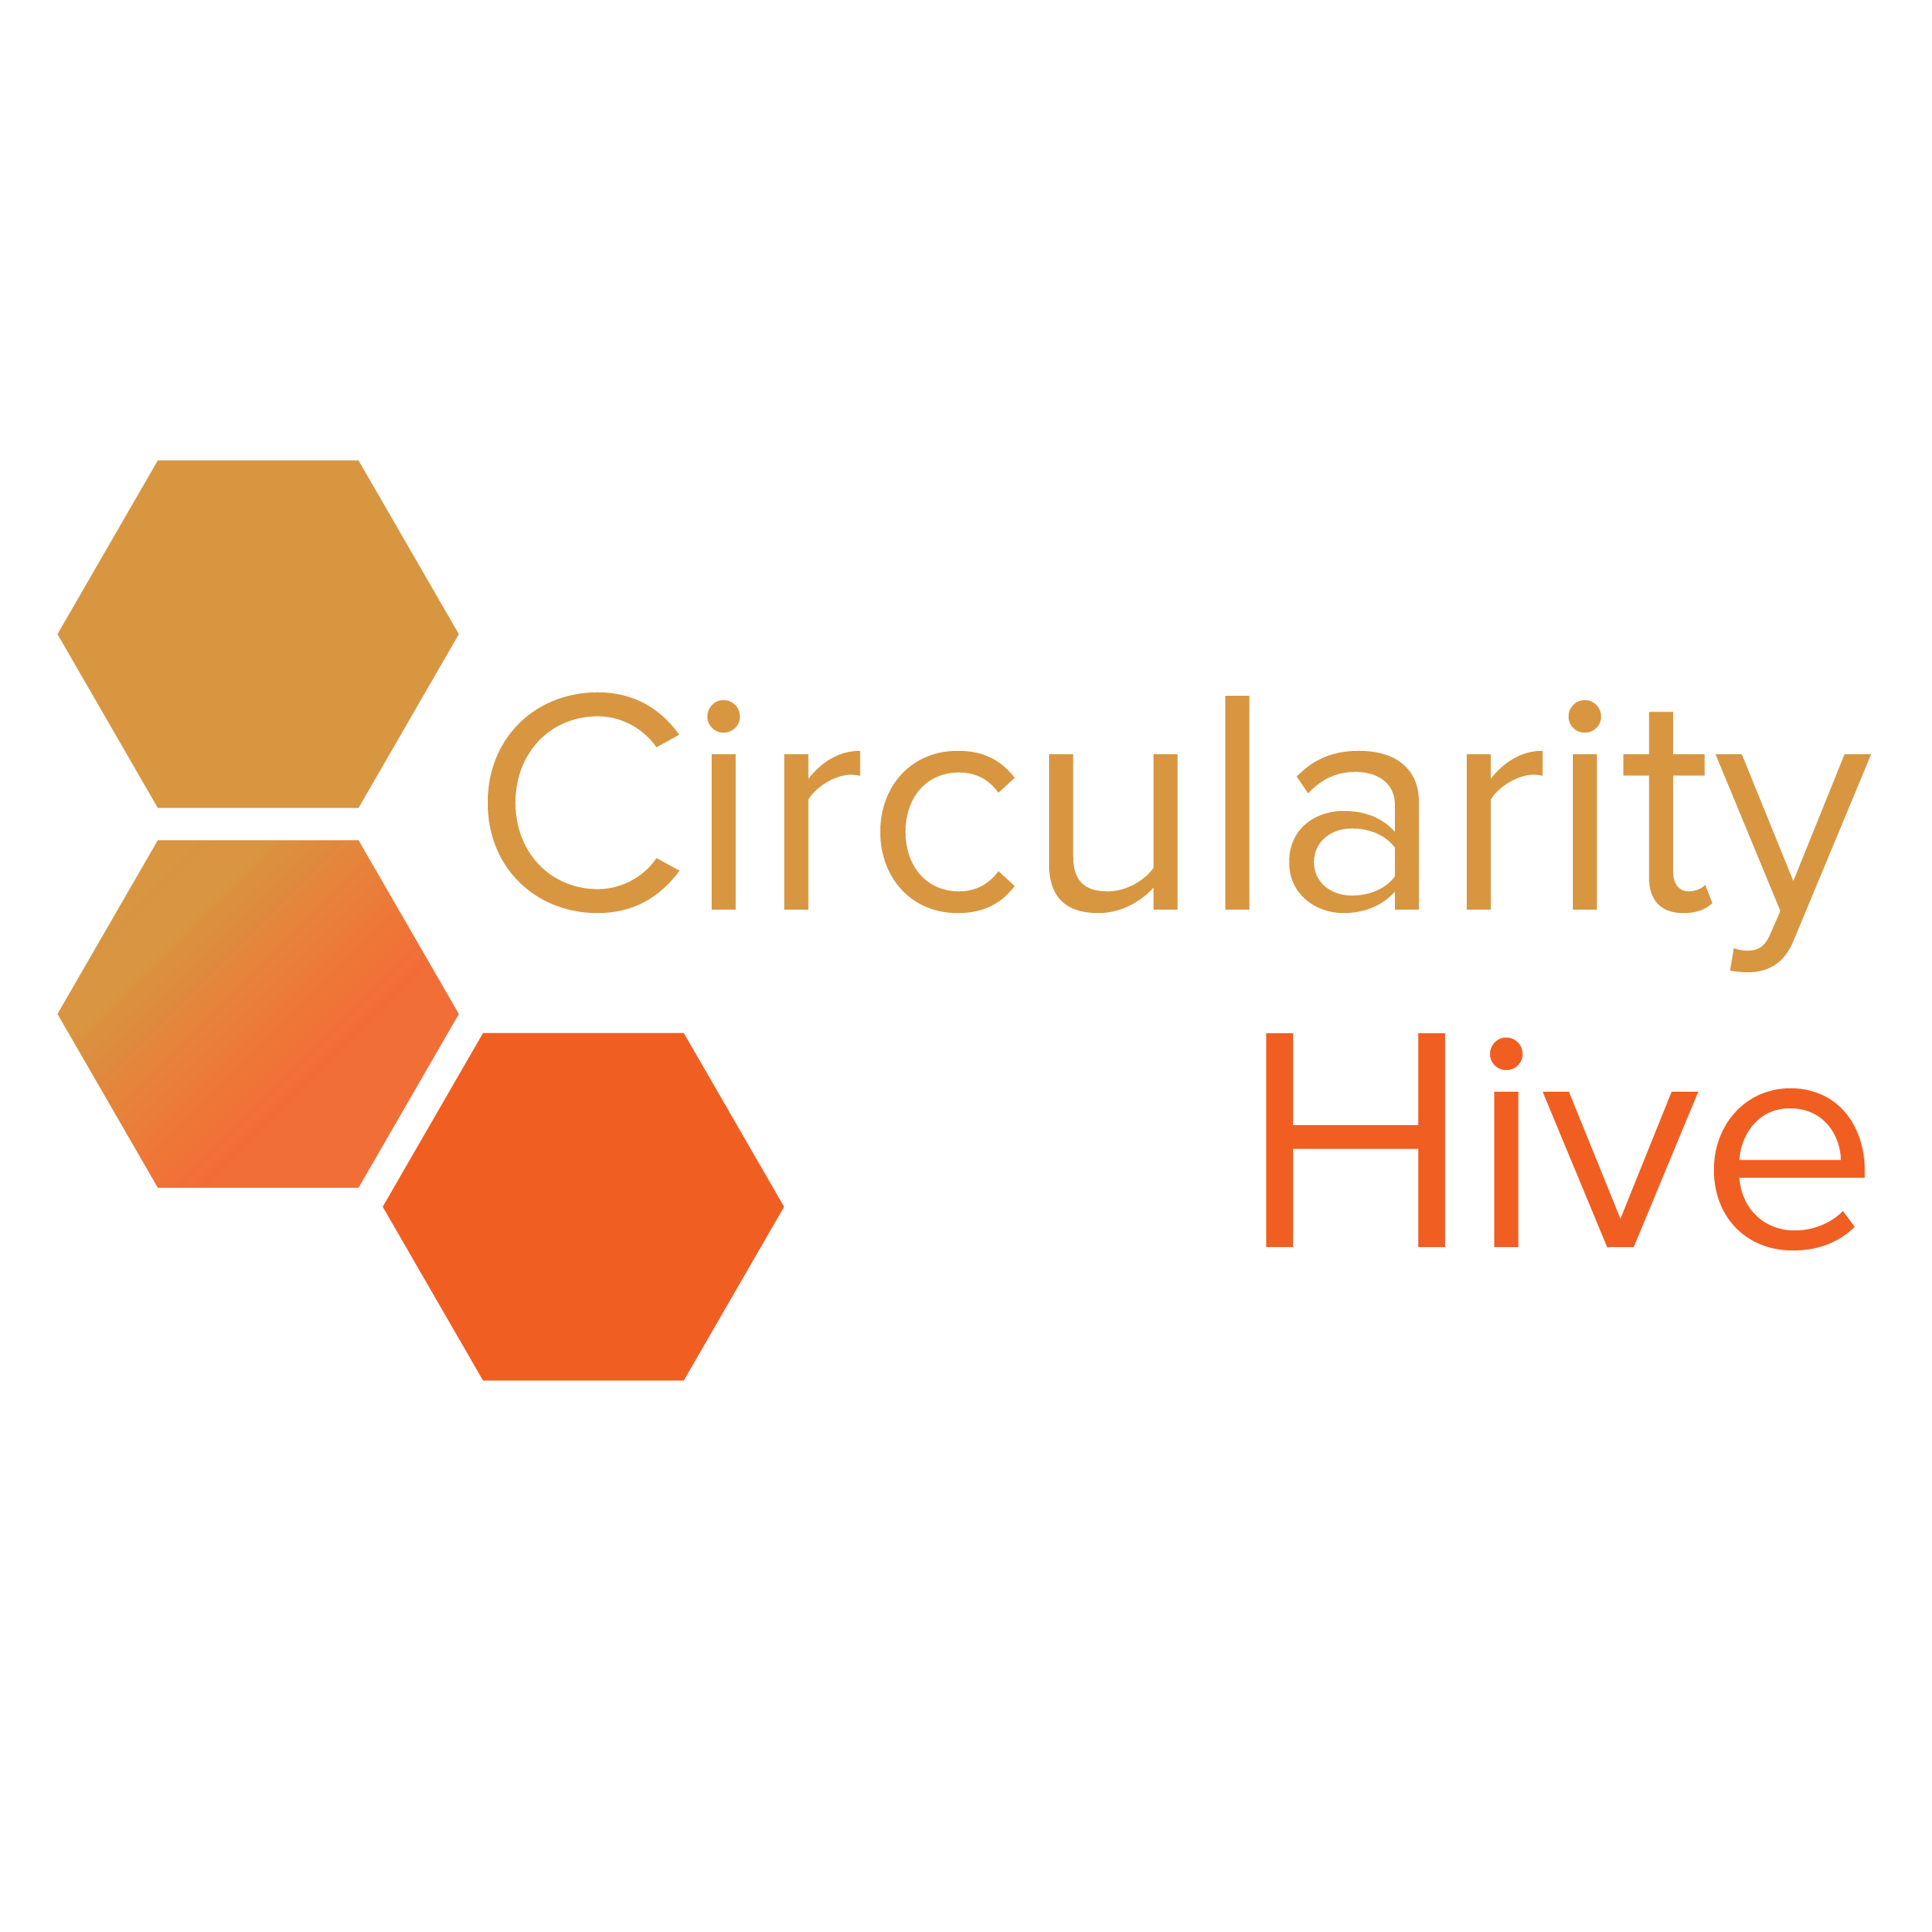 Circularity Hive is the ambassadors network for the circular economy - http://t.co/778uDUrOtj